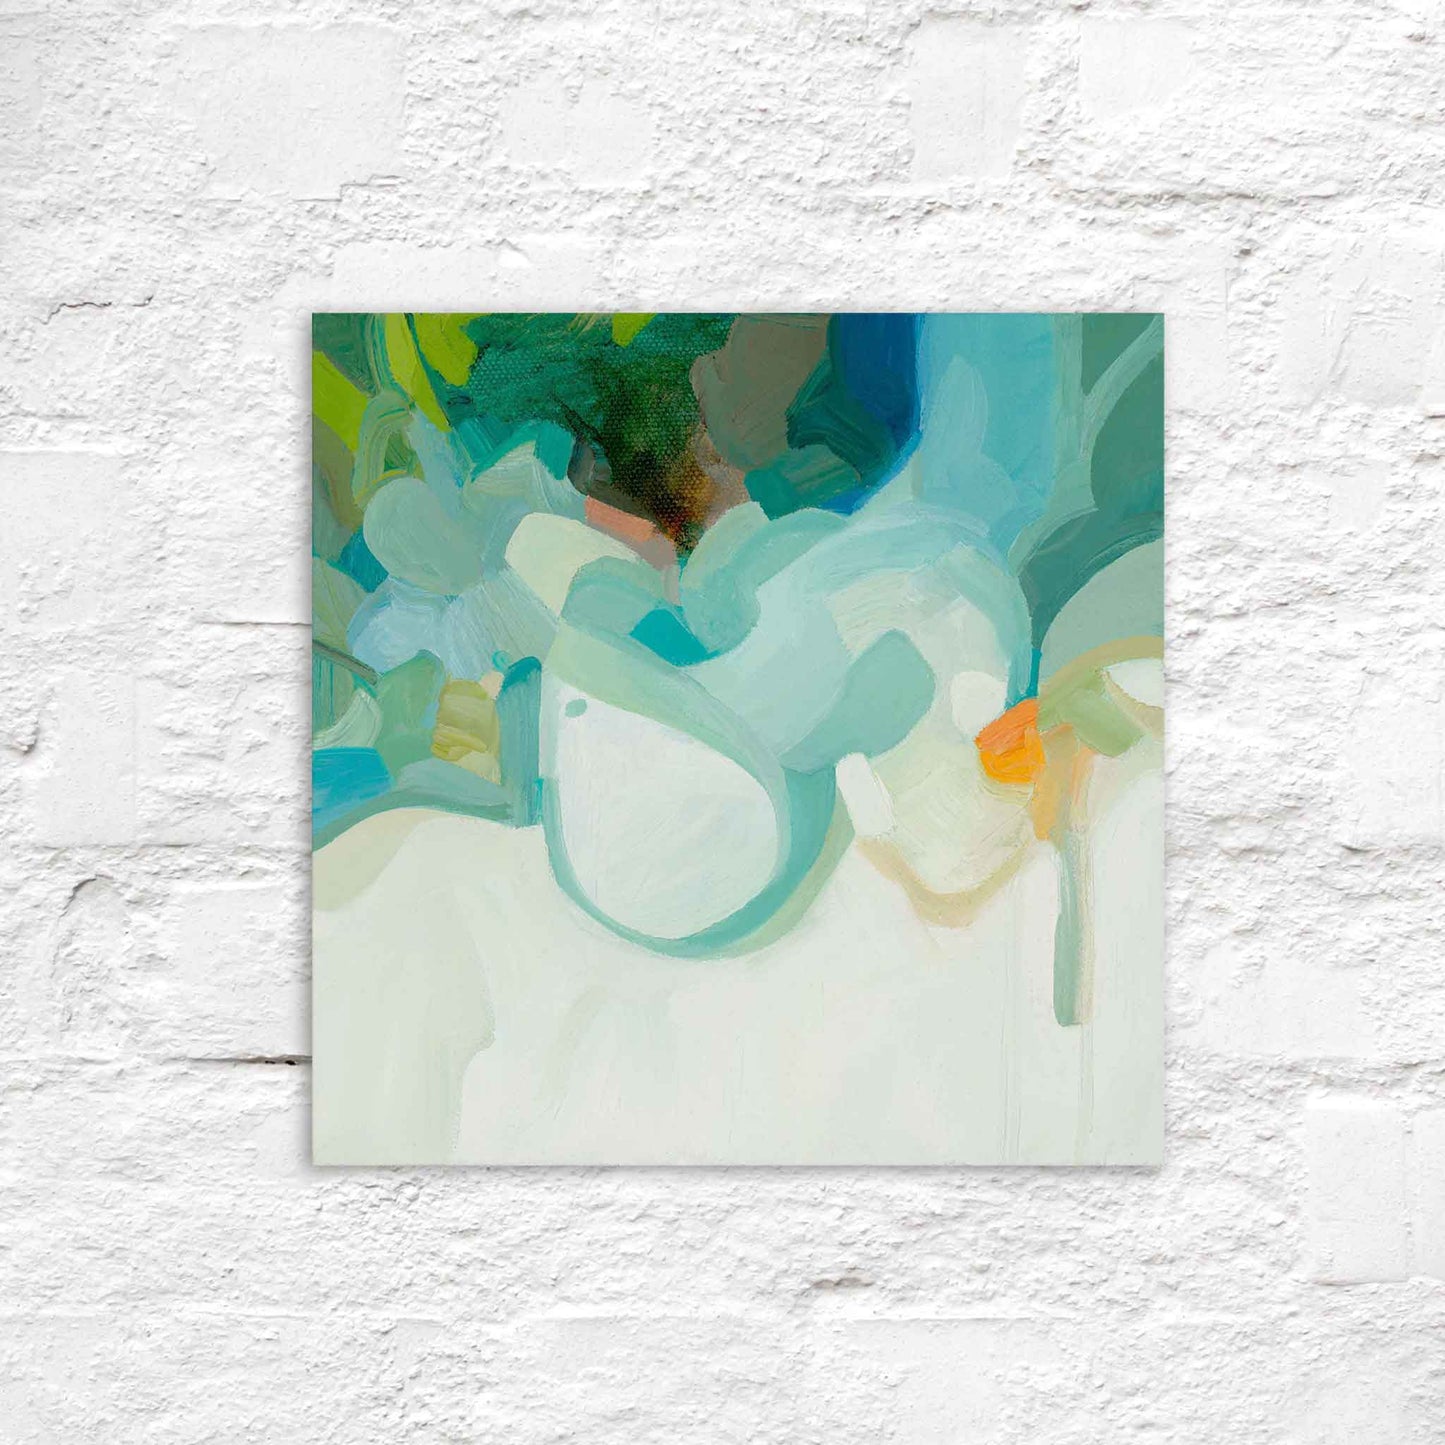 small square abstract oil painting on canvas in seafoam green turquoise green and yellow